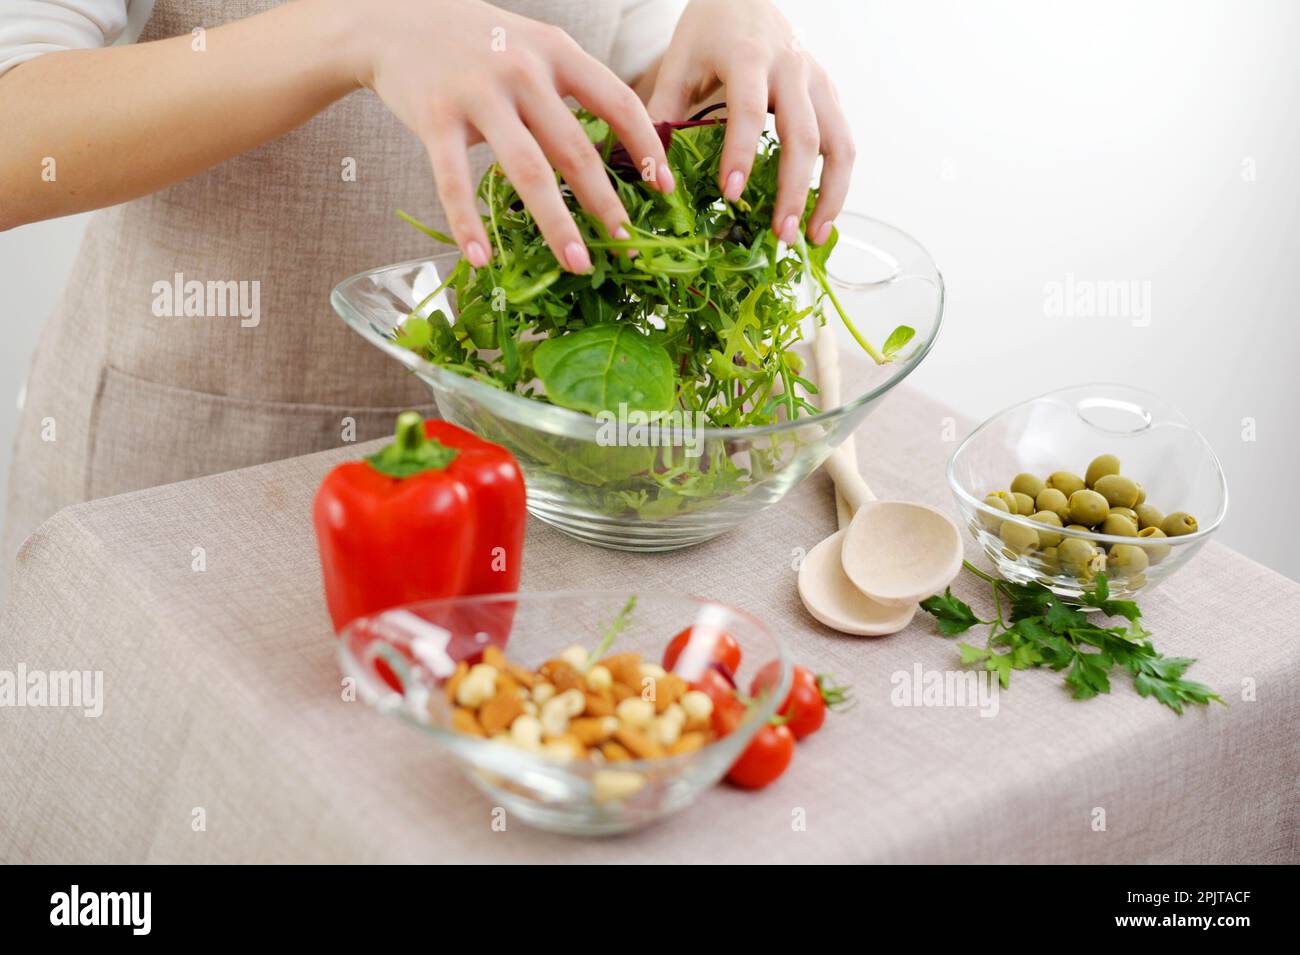 girl is stirs freshly prepared salad from arugula, cherry tomatoes, and mozzarella with your hands in a wooden bowl, around the ingredients are laid out top view. High quality photo Stock Photo